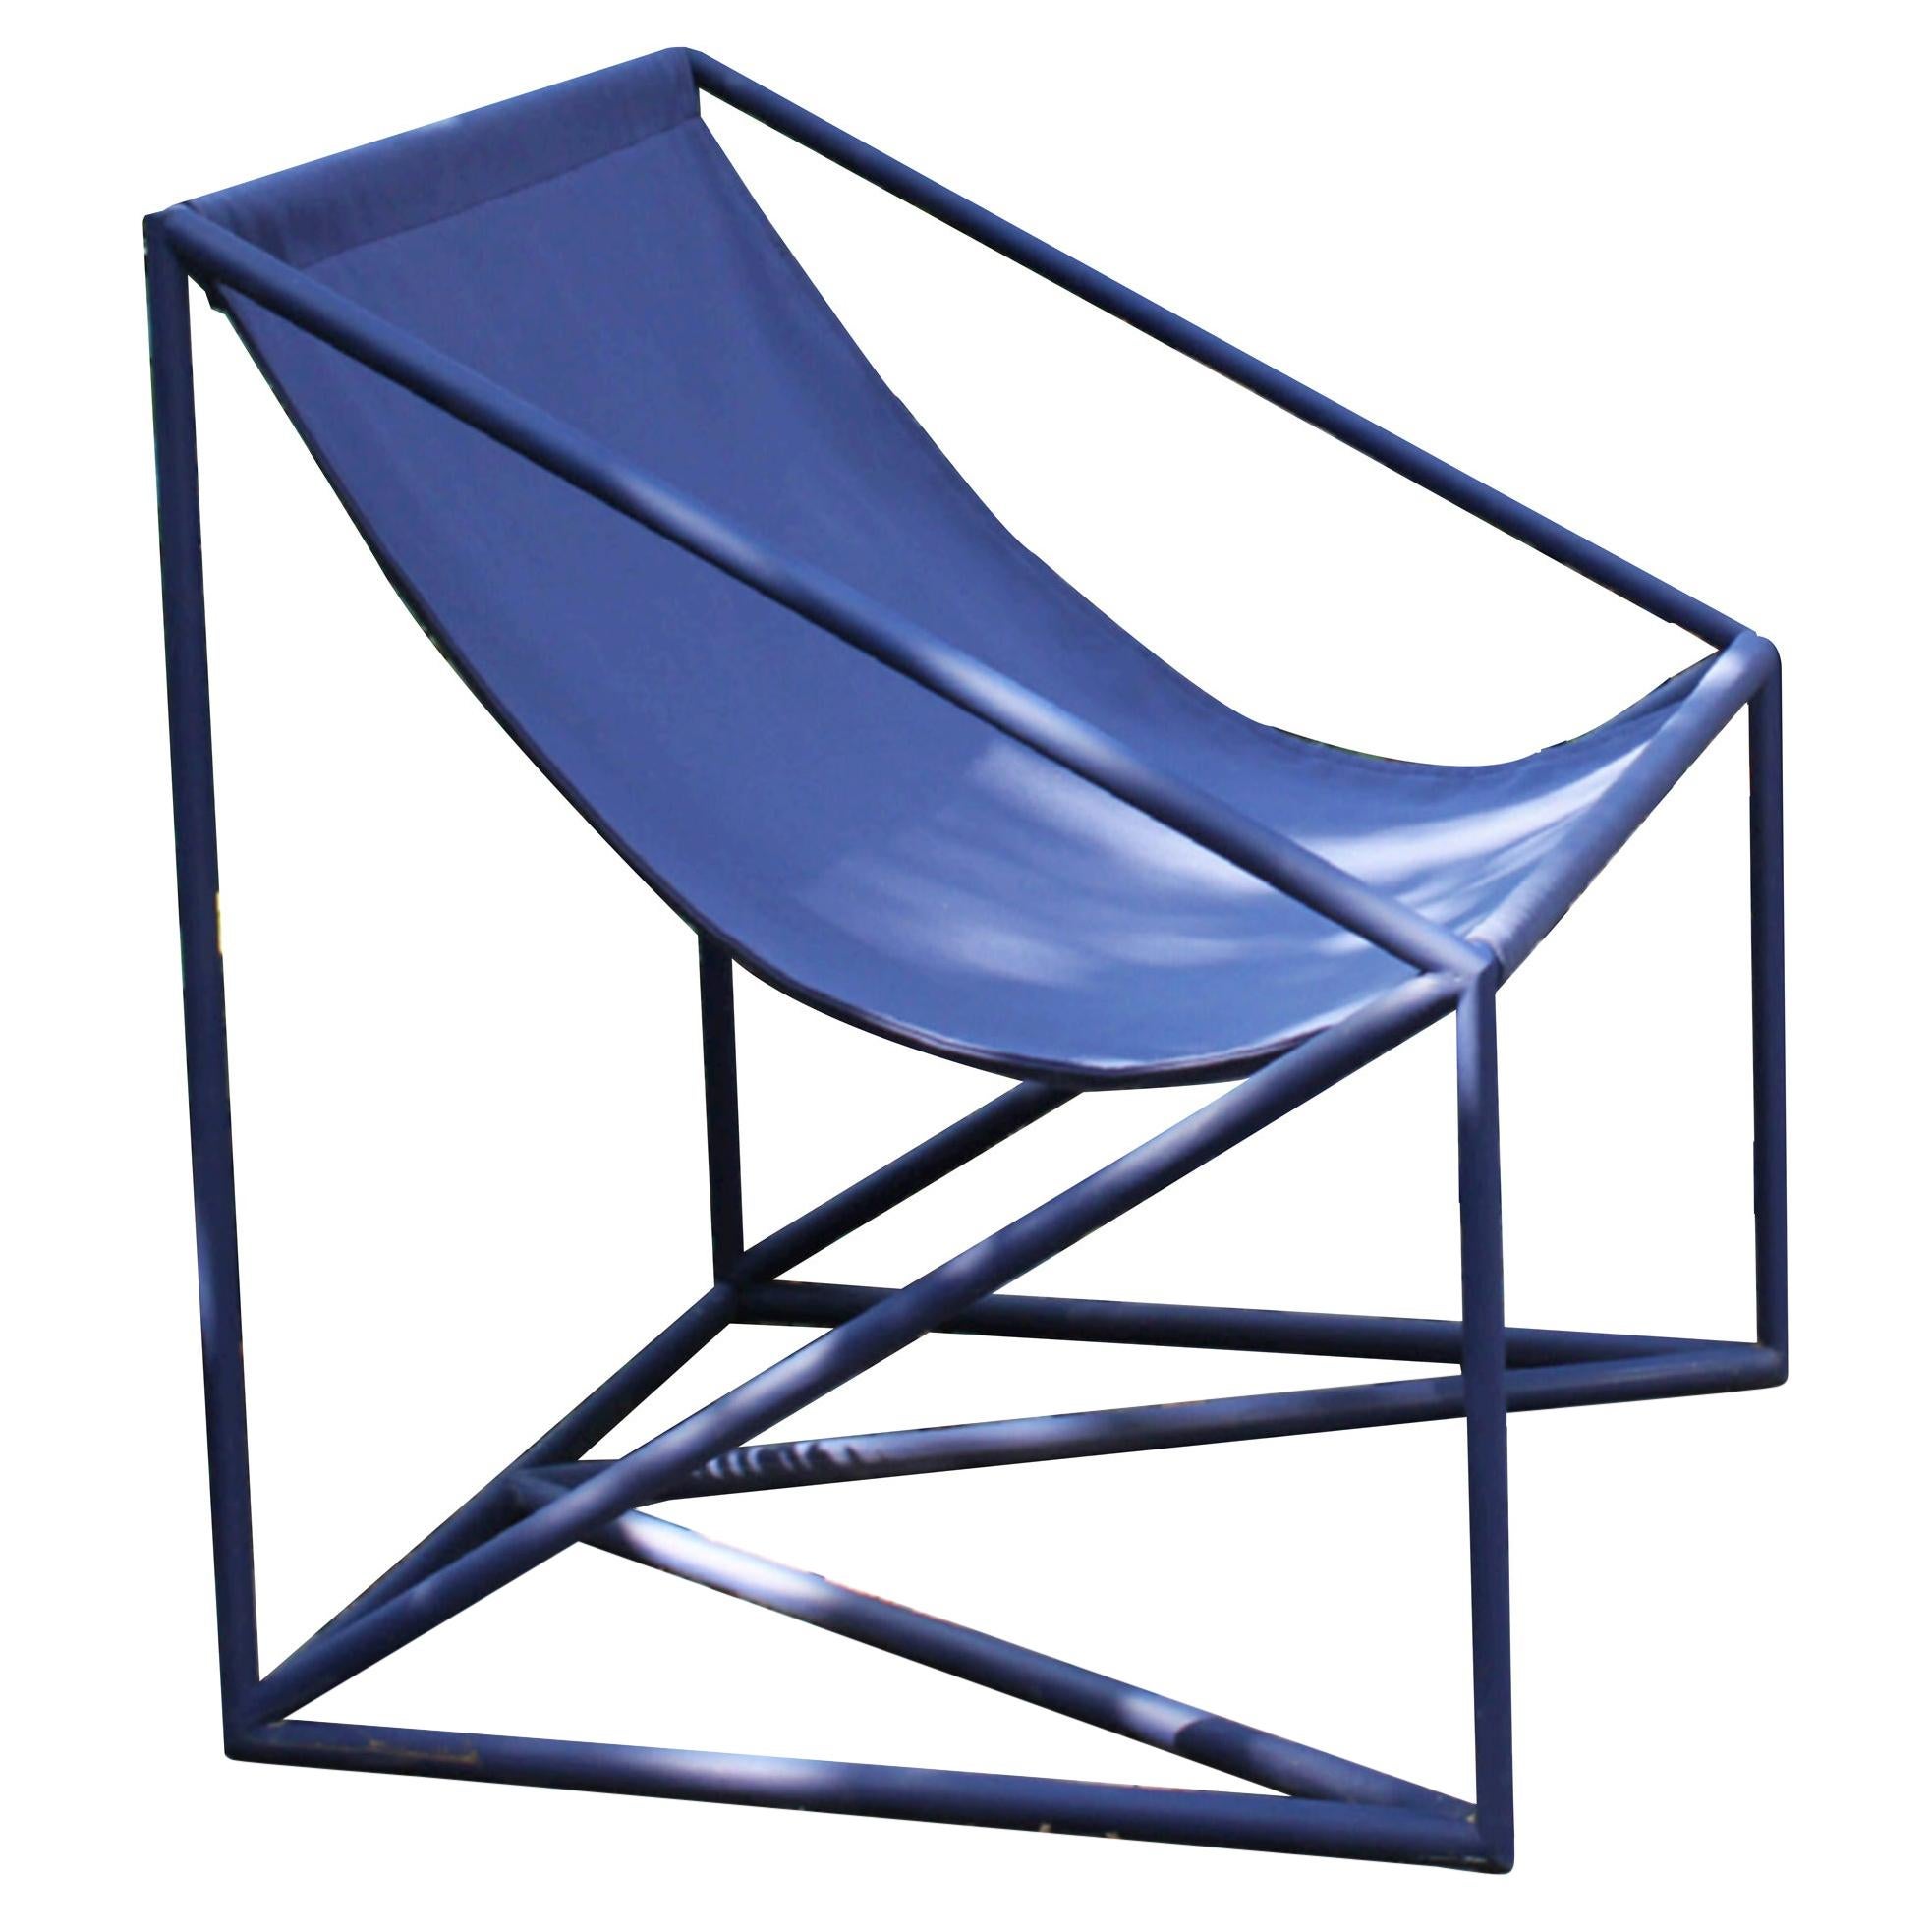 La Tuba Outdoor Chair, Maria Beckmann, Represented by Tuleste Factory For Sale